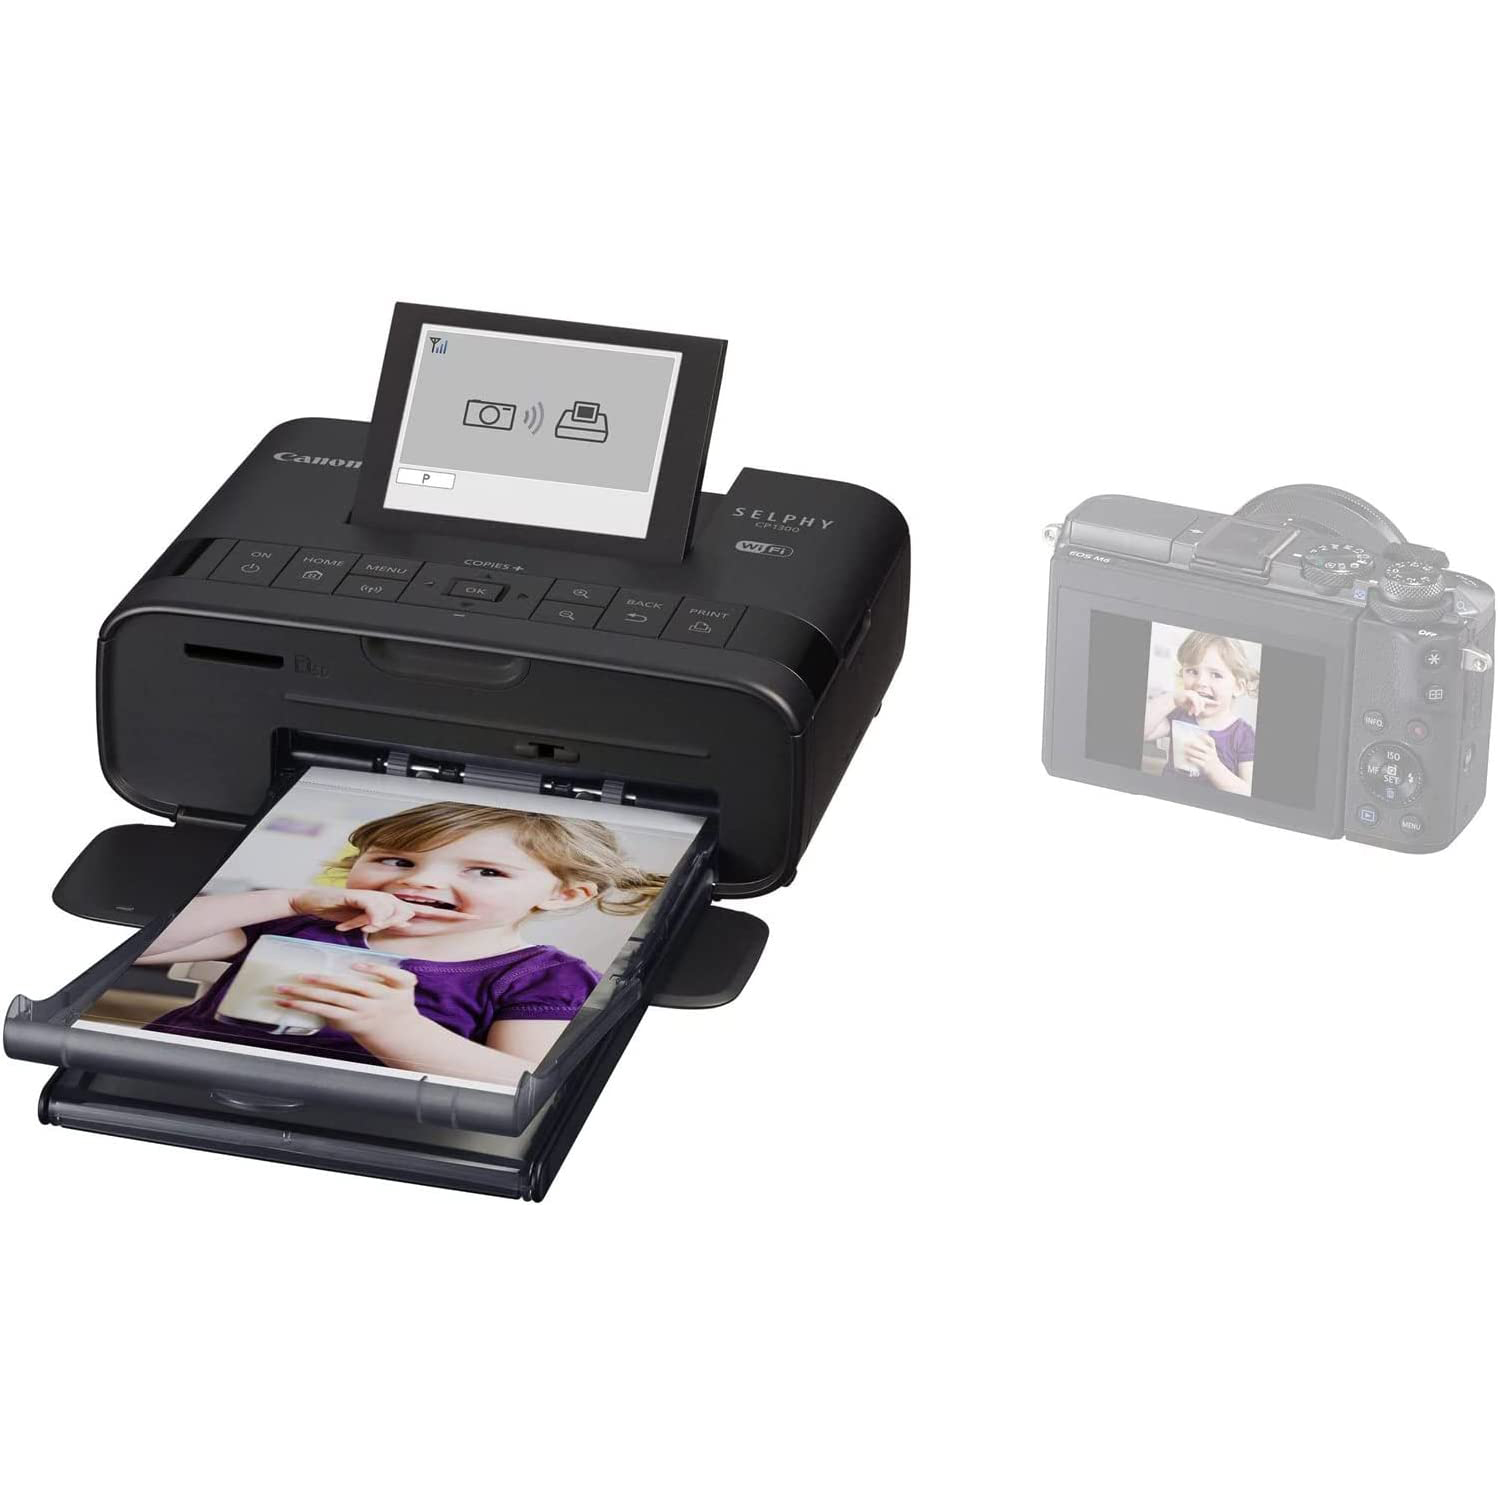 Canon SELPHY CP1300 Wireless Portable Photo Printer with Color Ink  108  Paper Sheets Set, USB Cable  Cleaning Cloth Inkjet Laser 4x6 Label, Air  Print app, LCD Screen, 1-Year Warranty